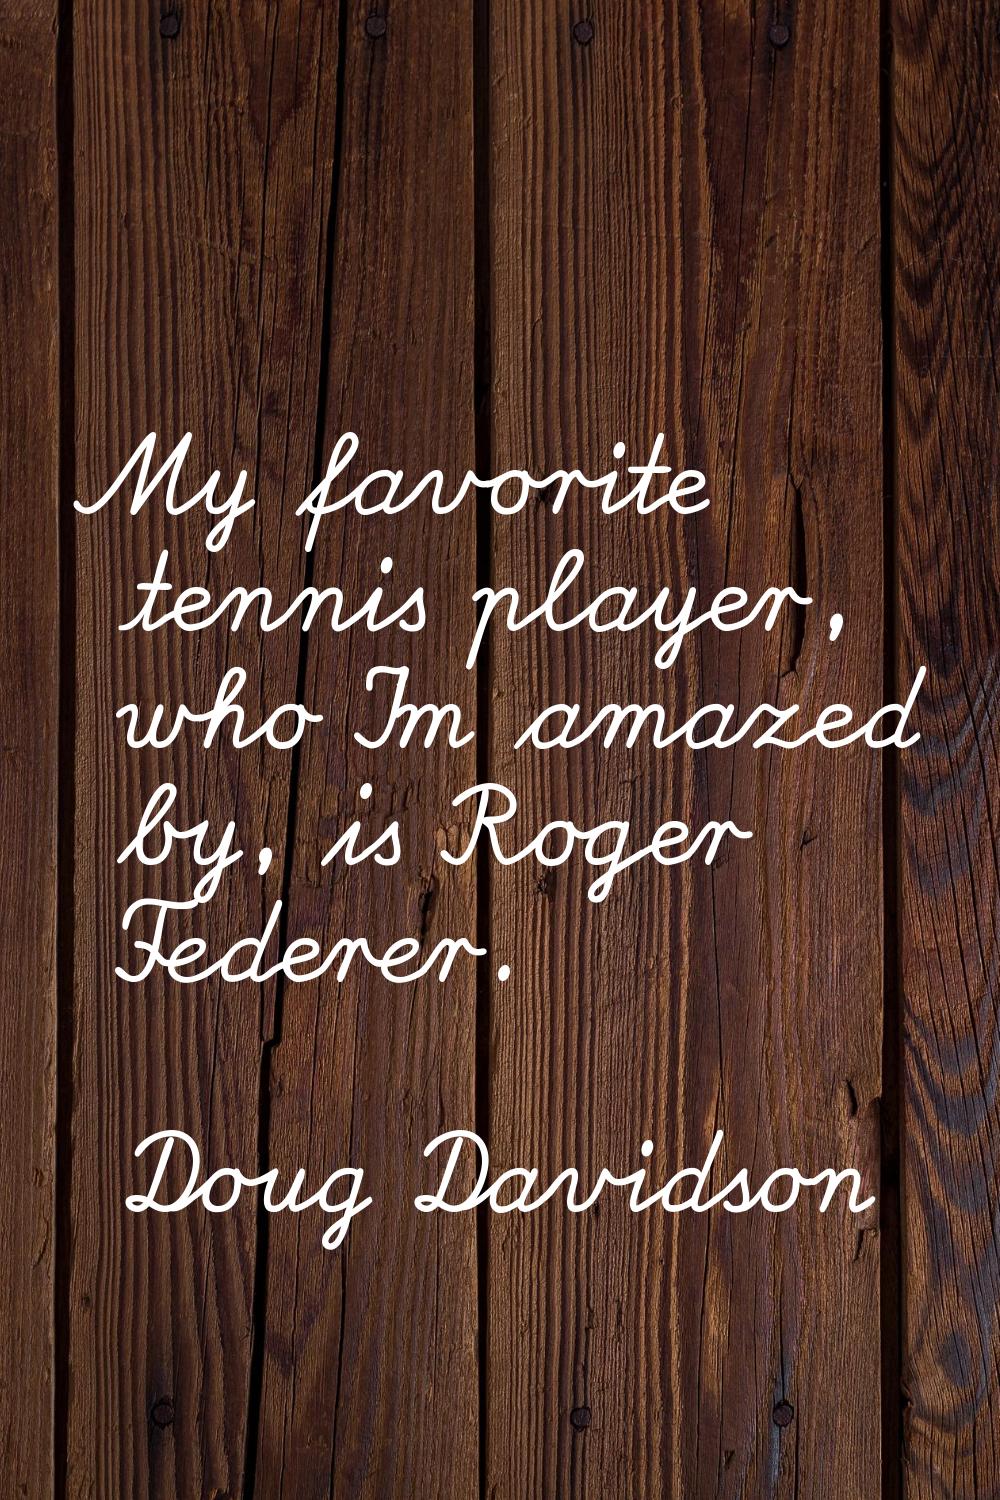 My favorite tennis player, who I'm amazed by, is Roger Federer.